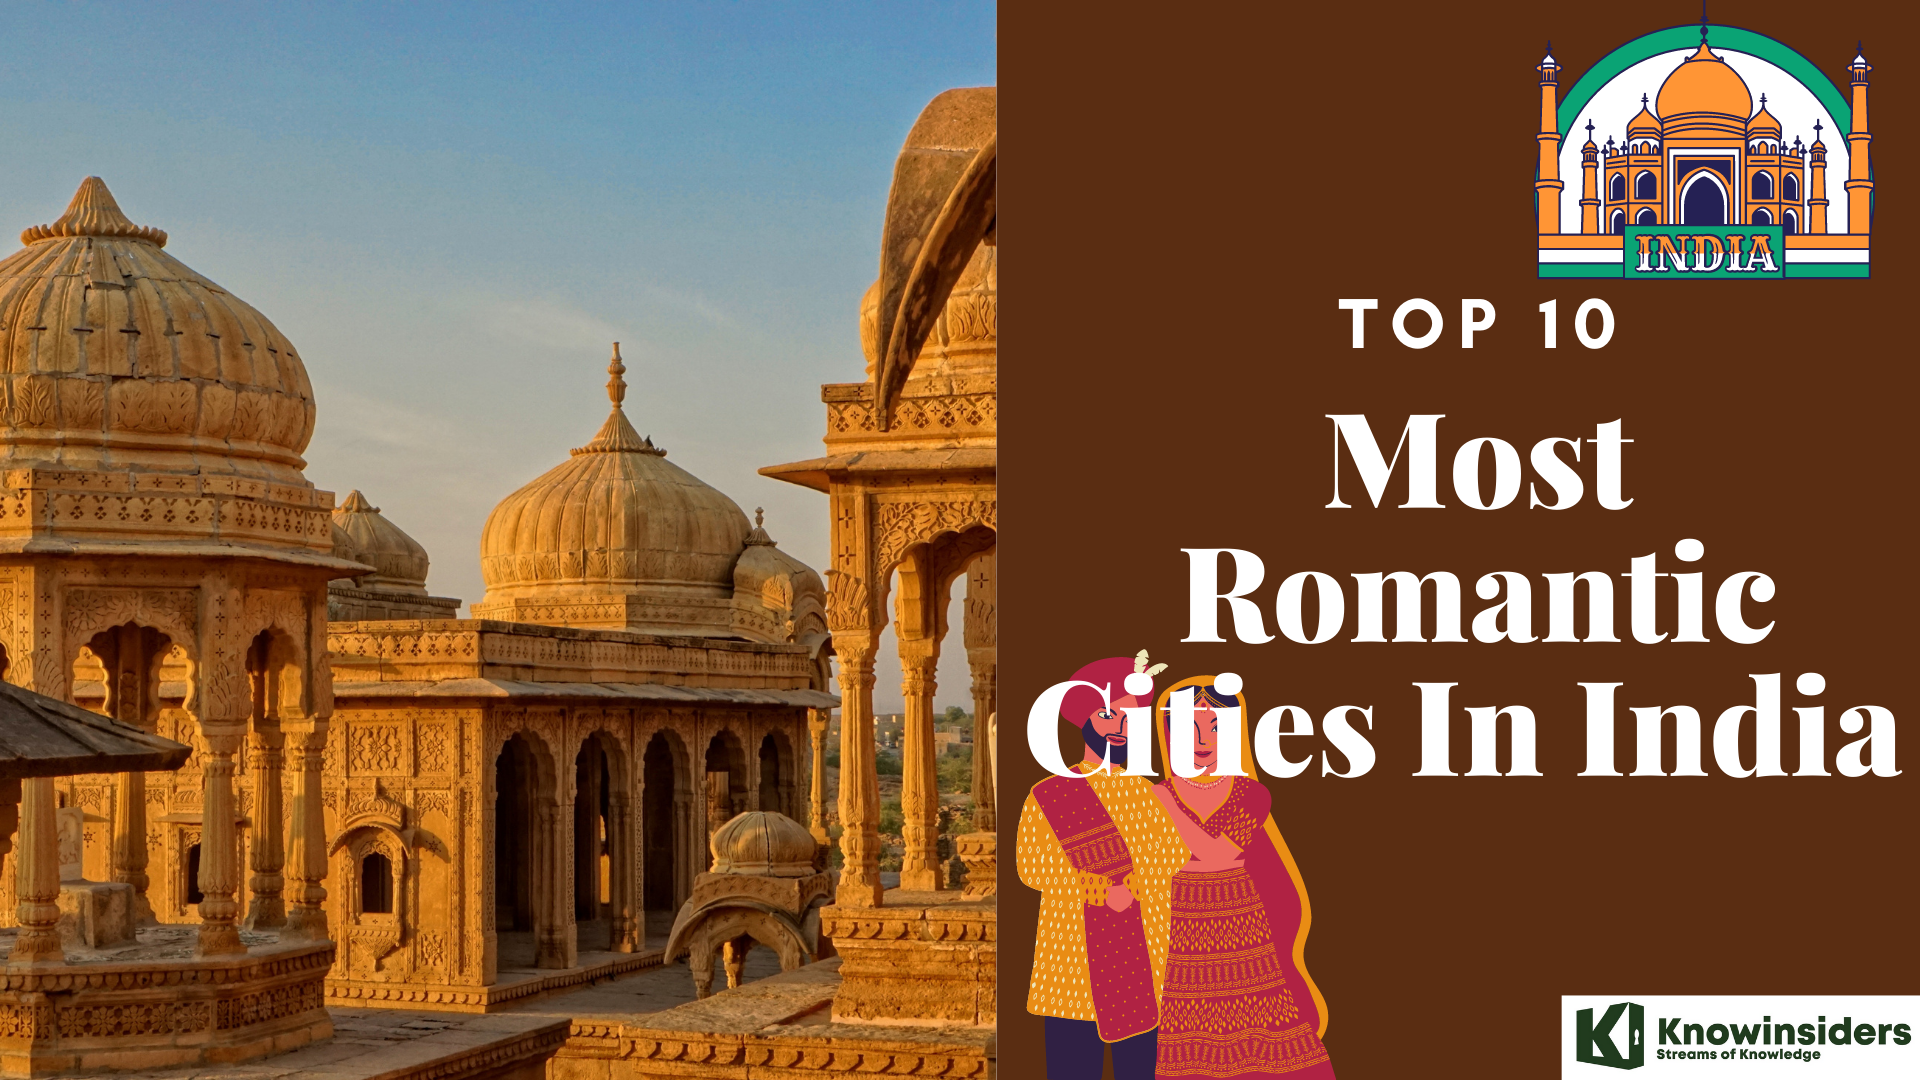 Top 10 Most Romantic Cities in India